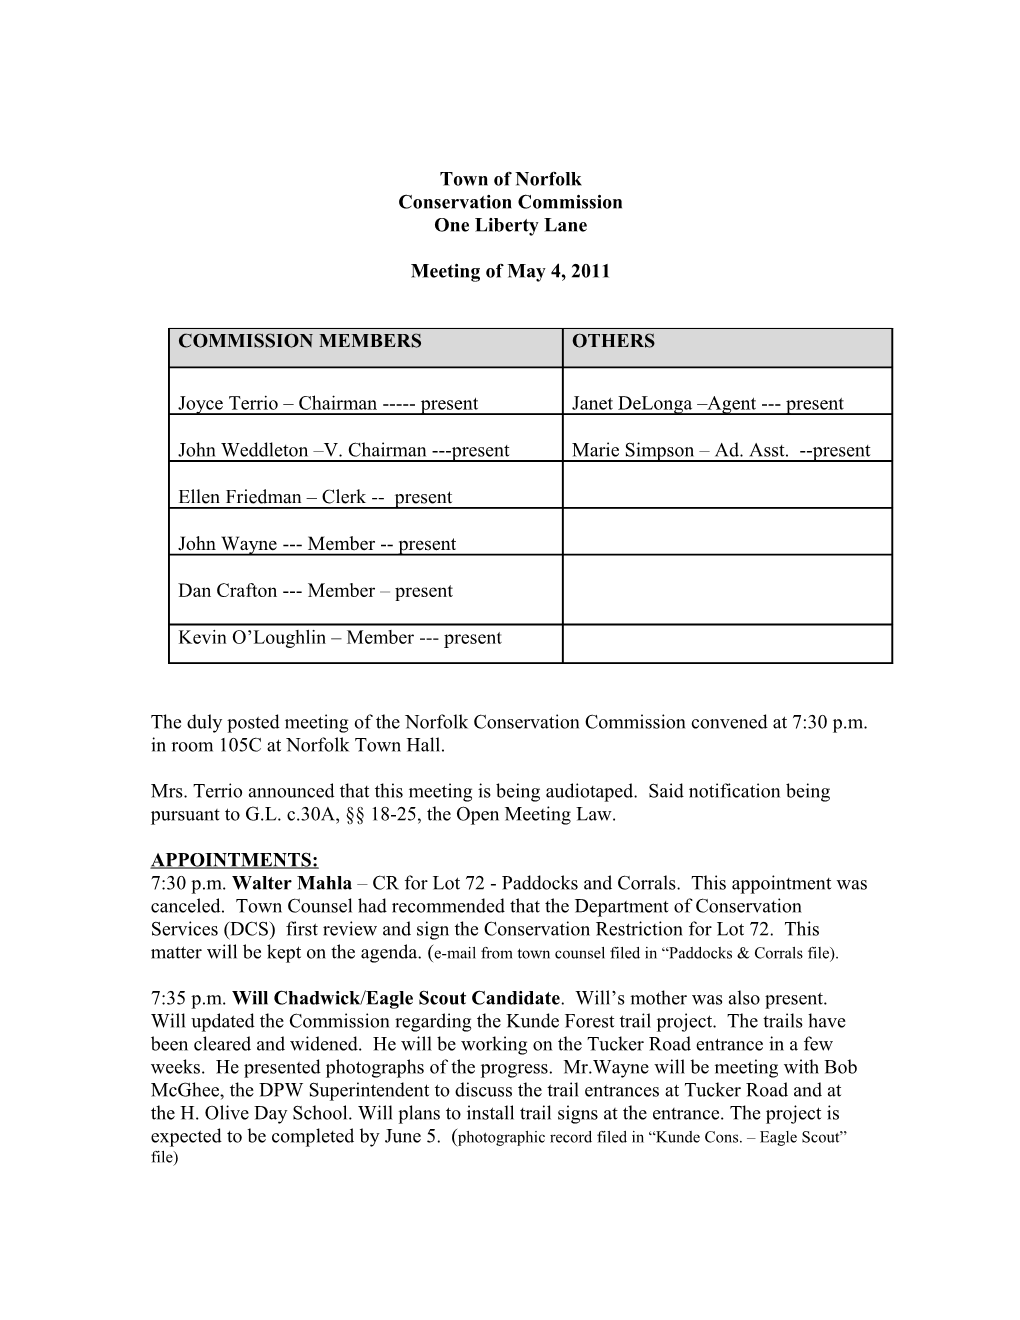 Conservation Commission Minutes of May 4, 2011